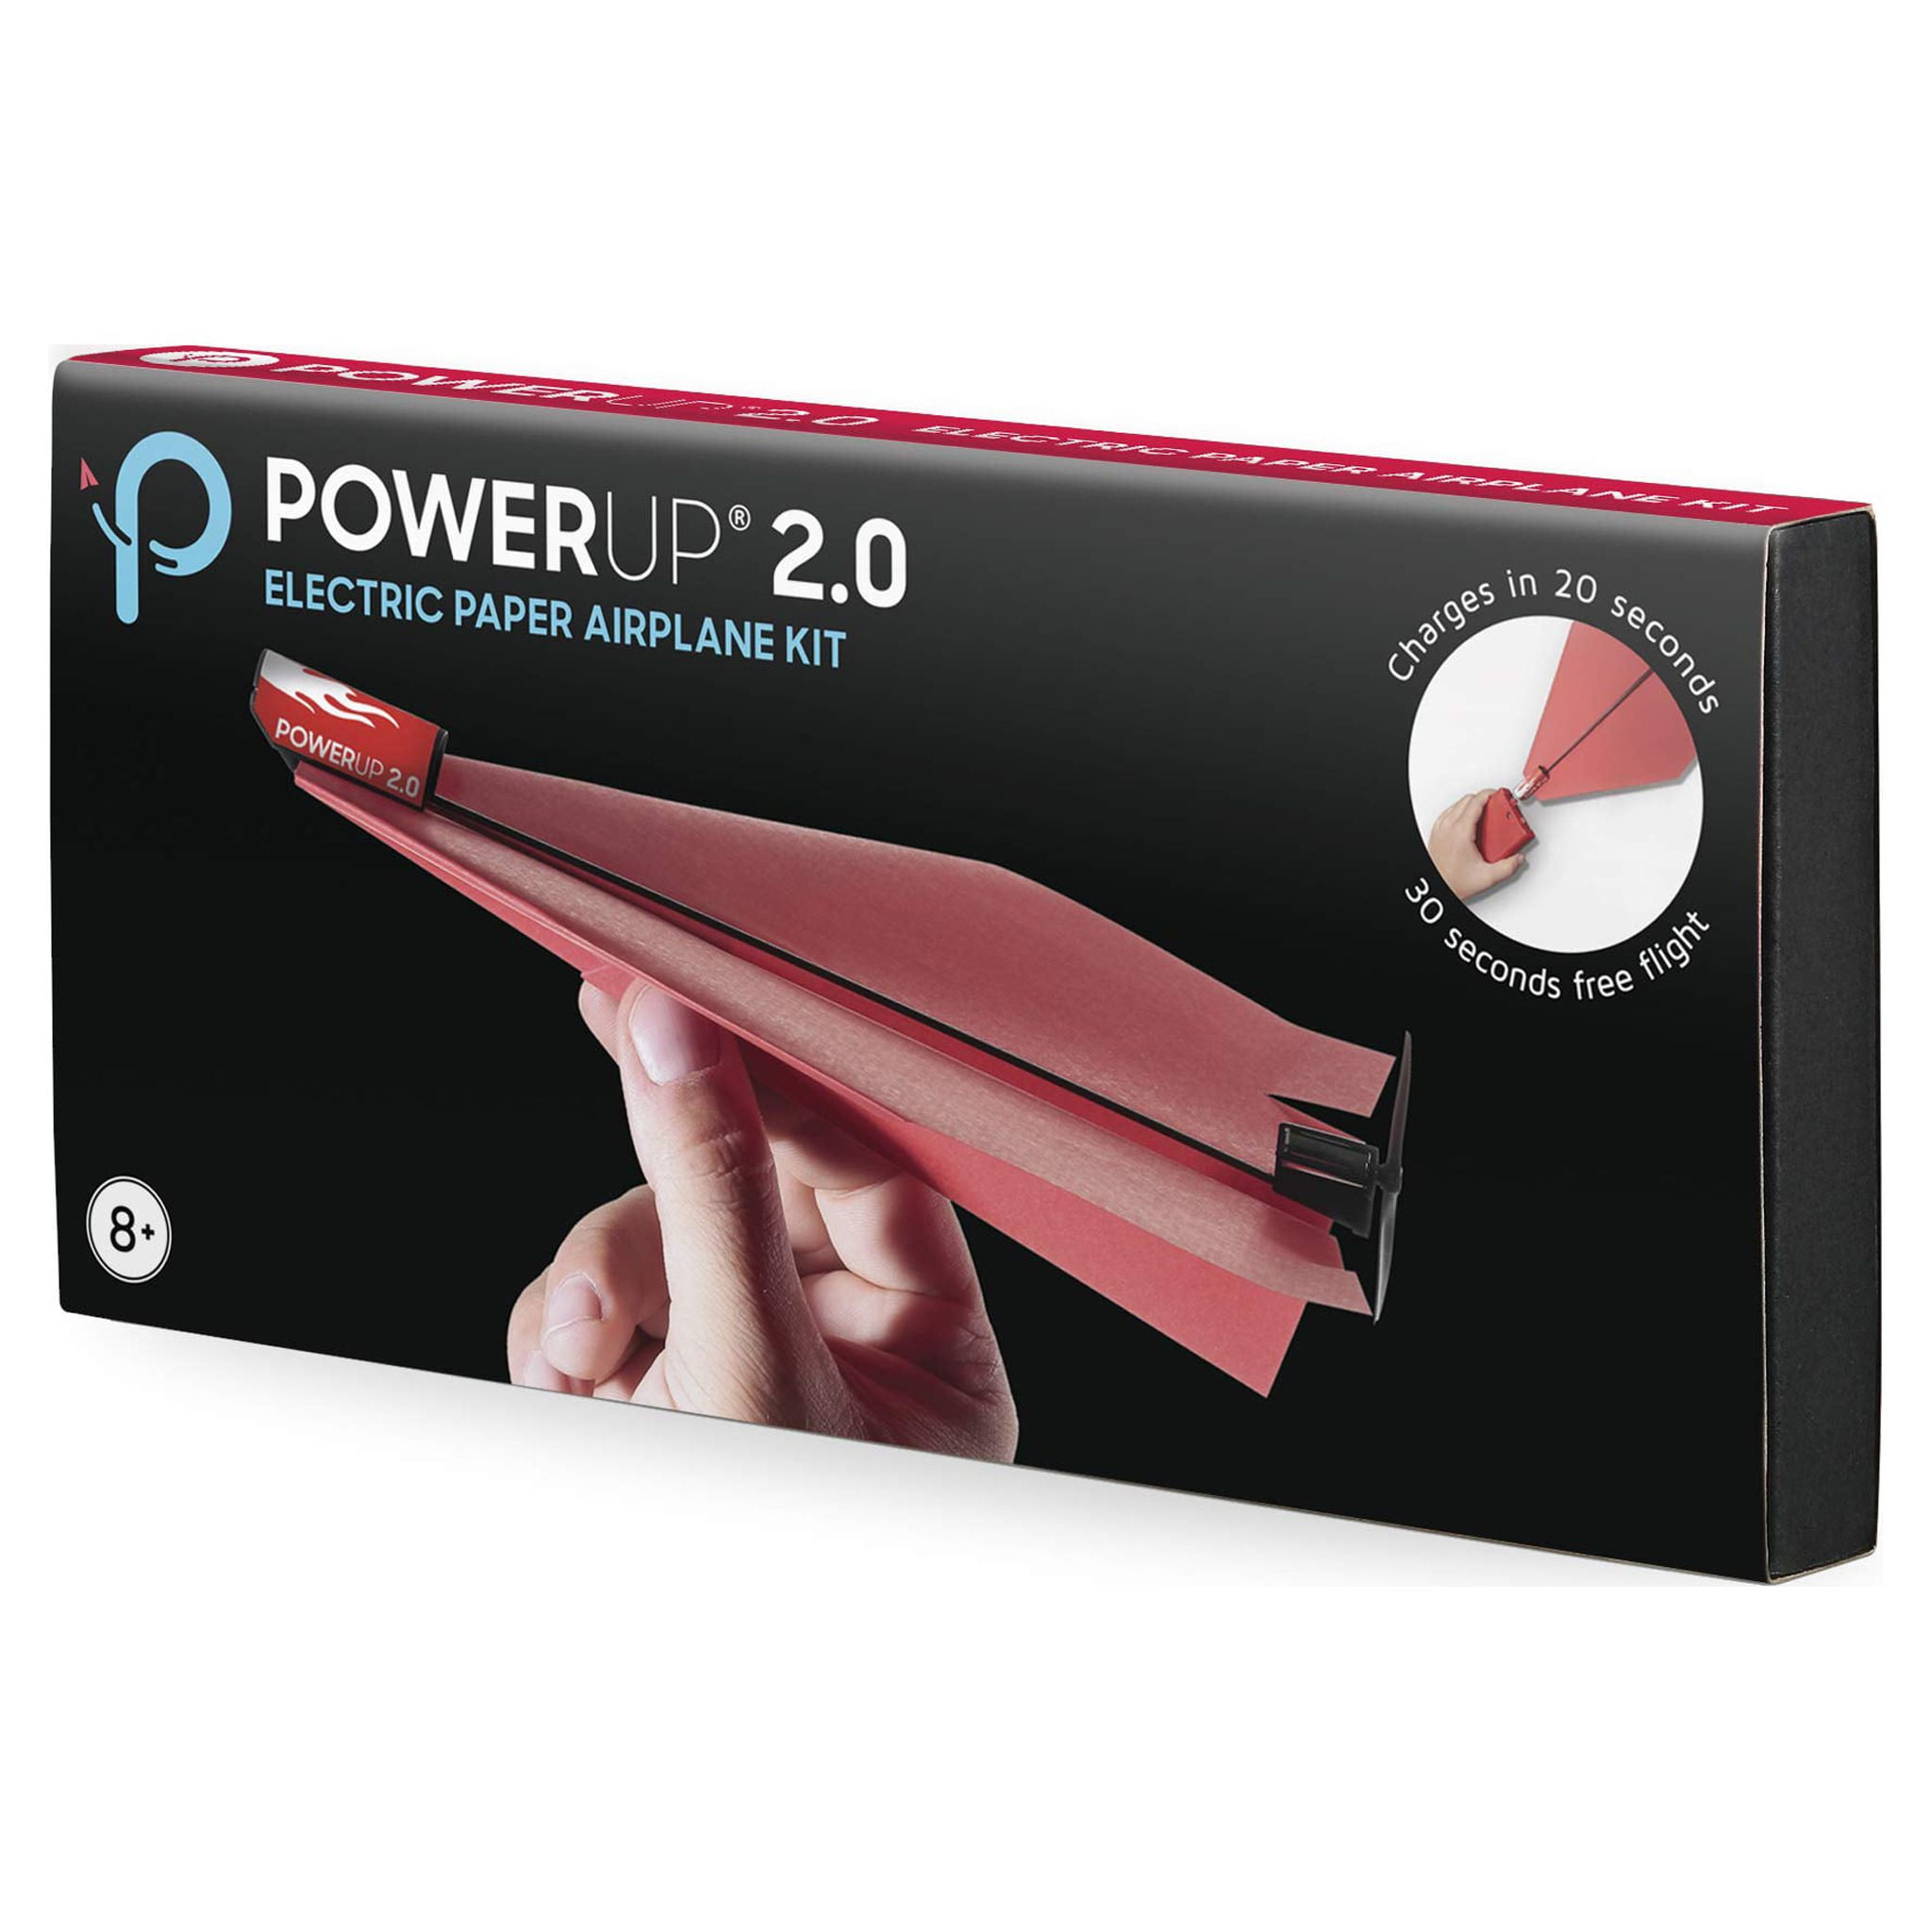 POWERUP 2.0 Paper Airplane Conversion Kit | Electric Motor for DIY